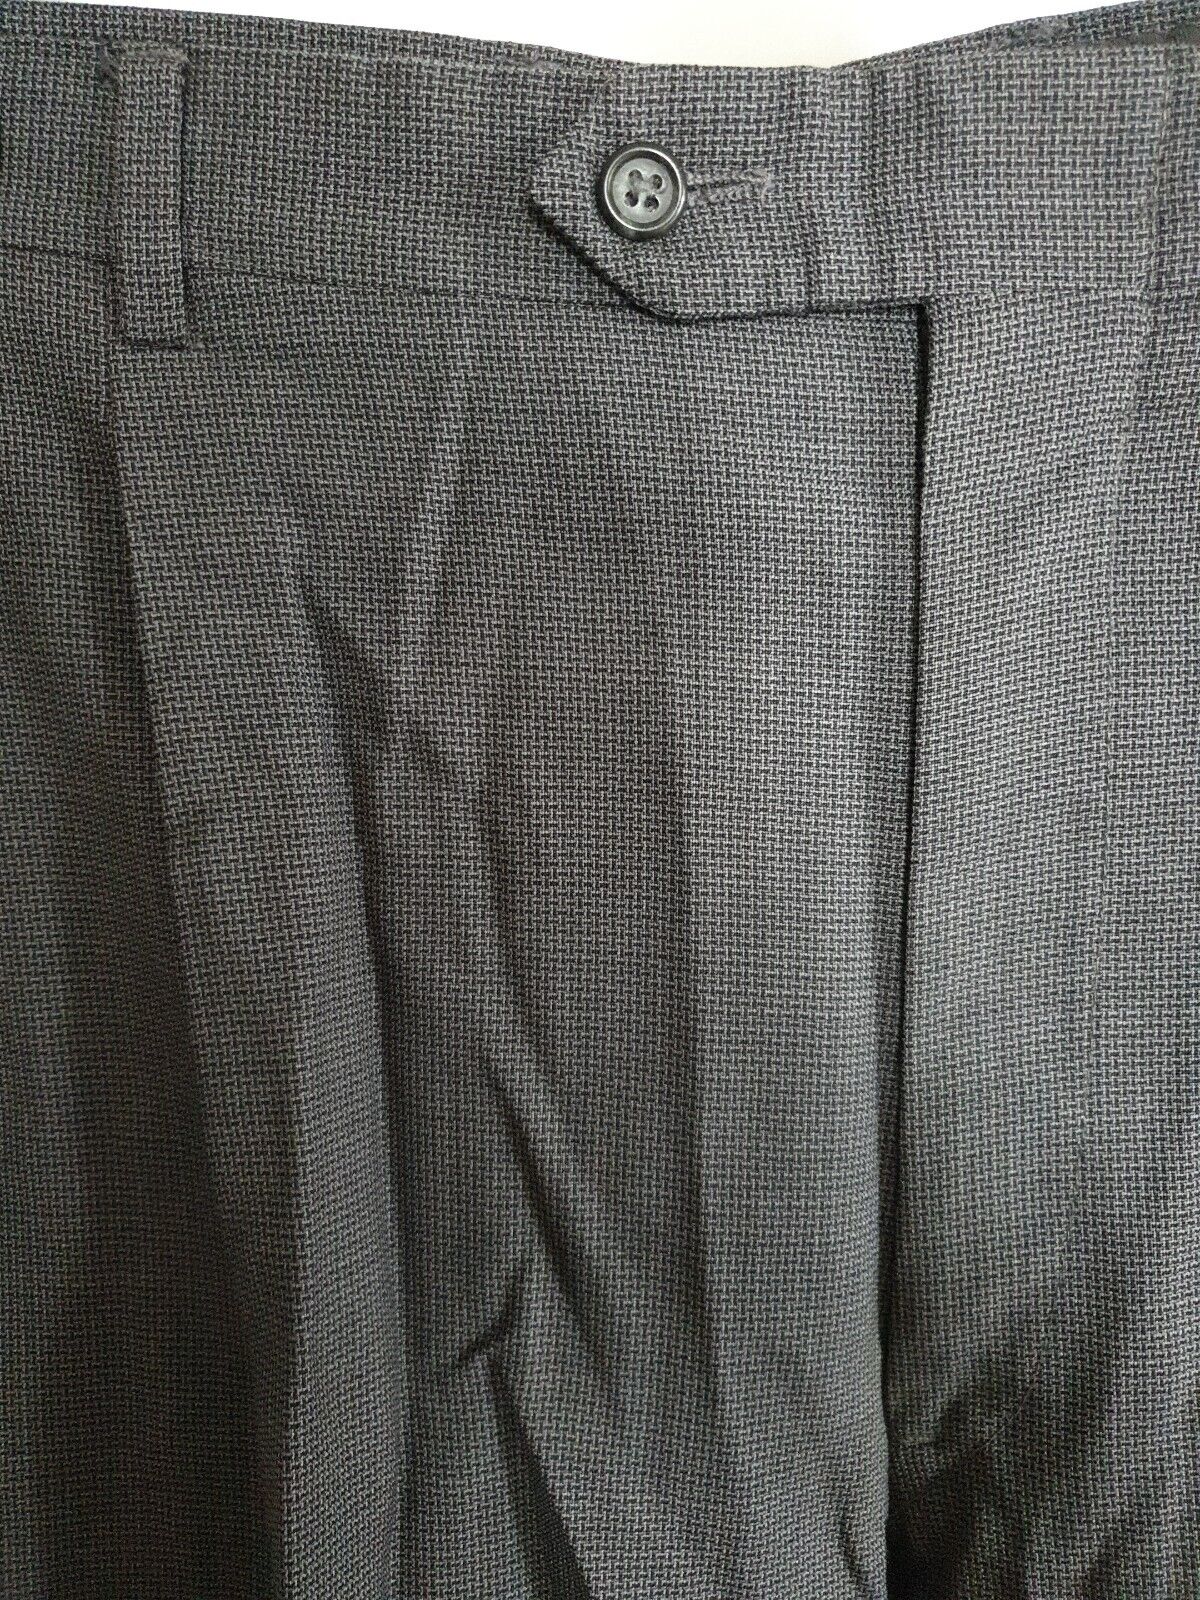 Mens Trousers Grey Size XL Ref G2